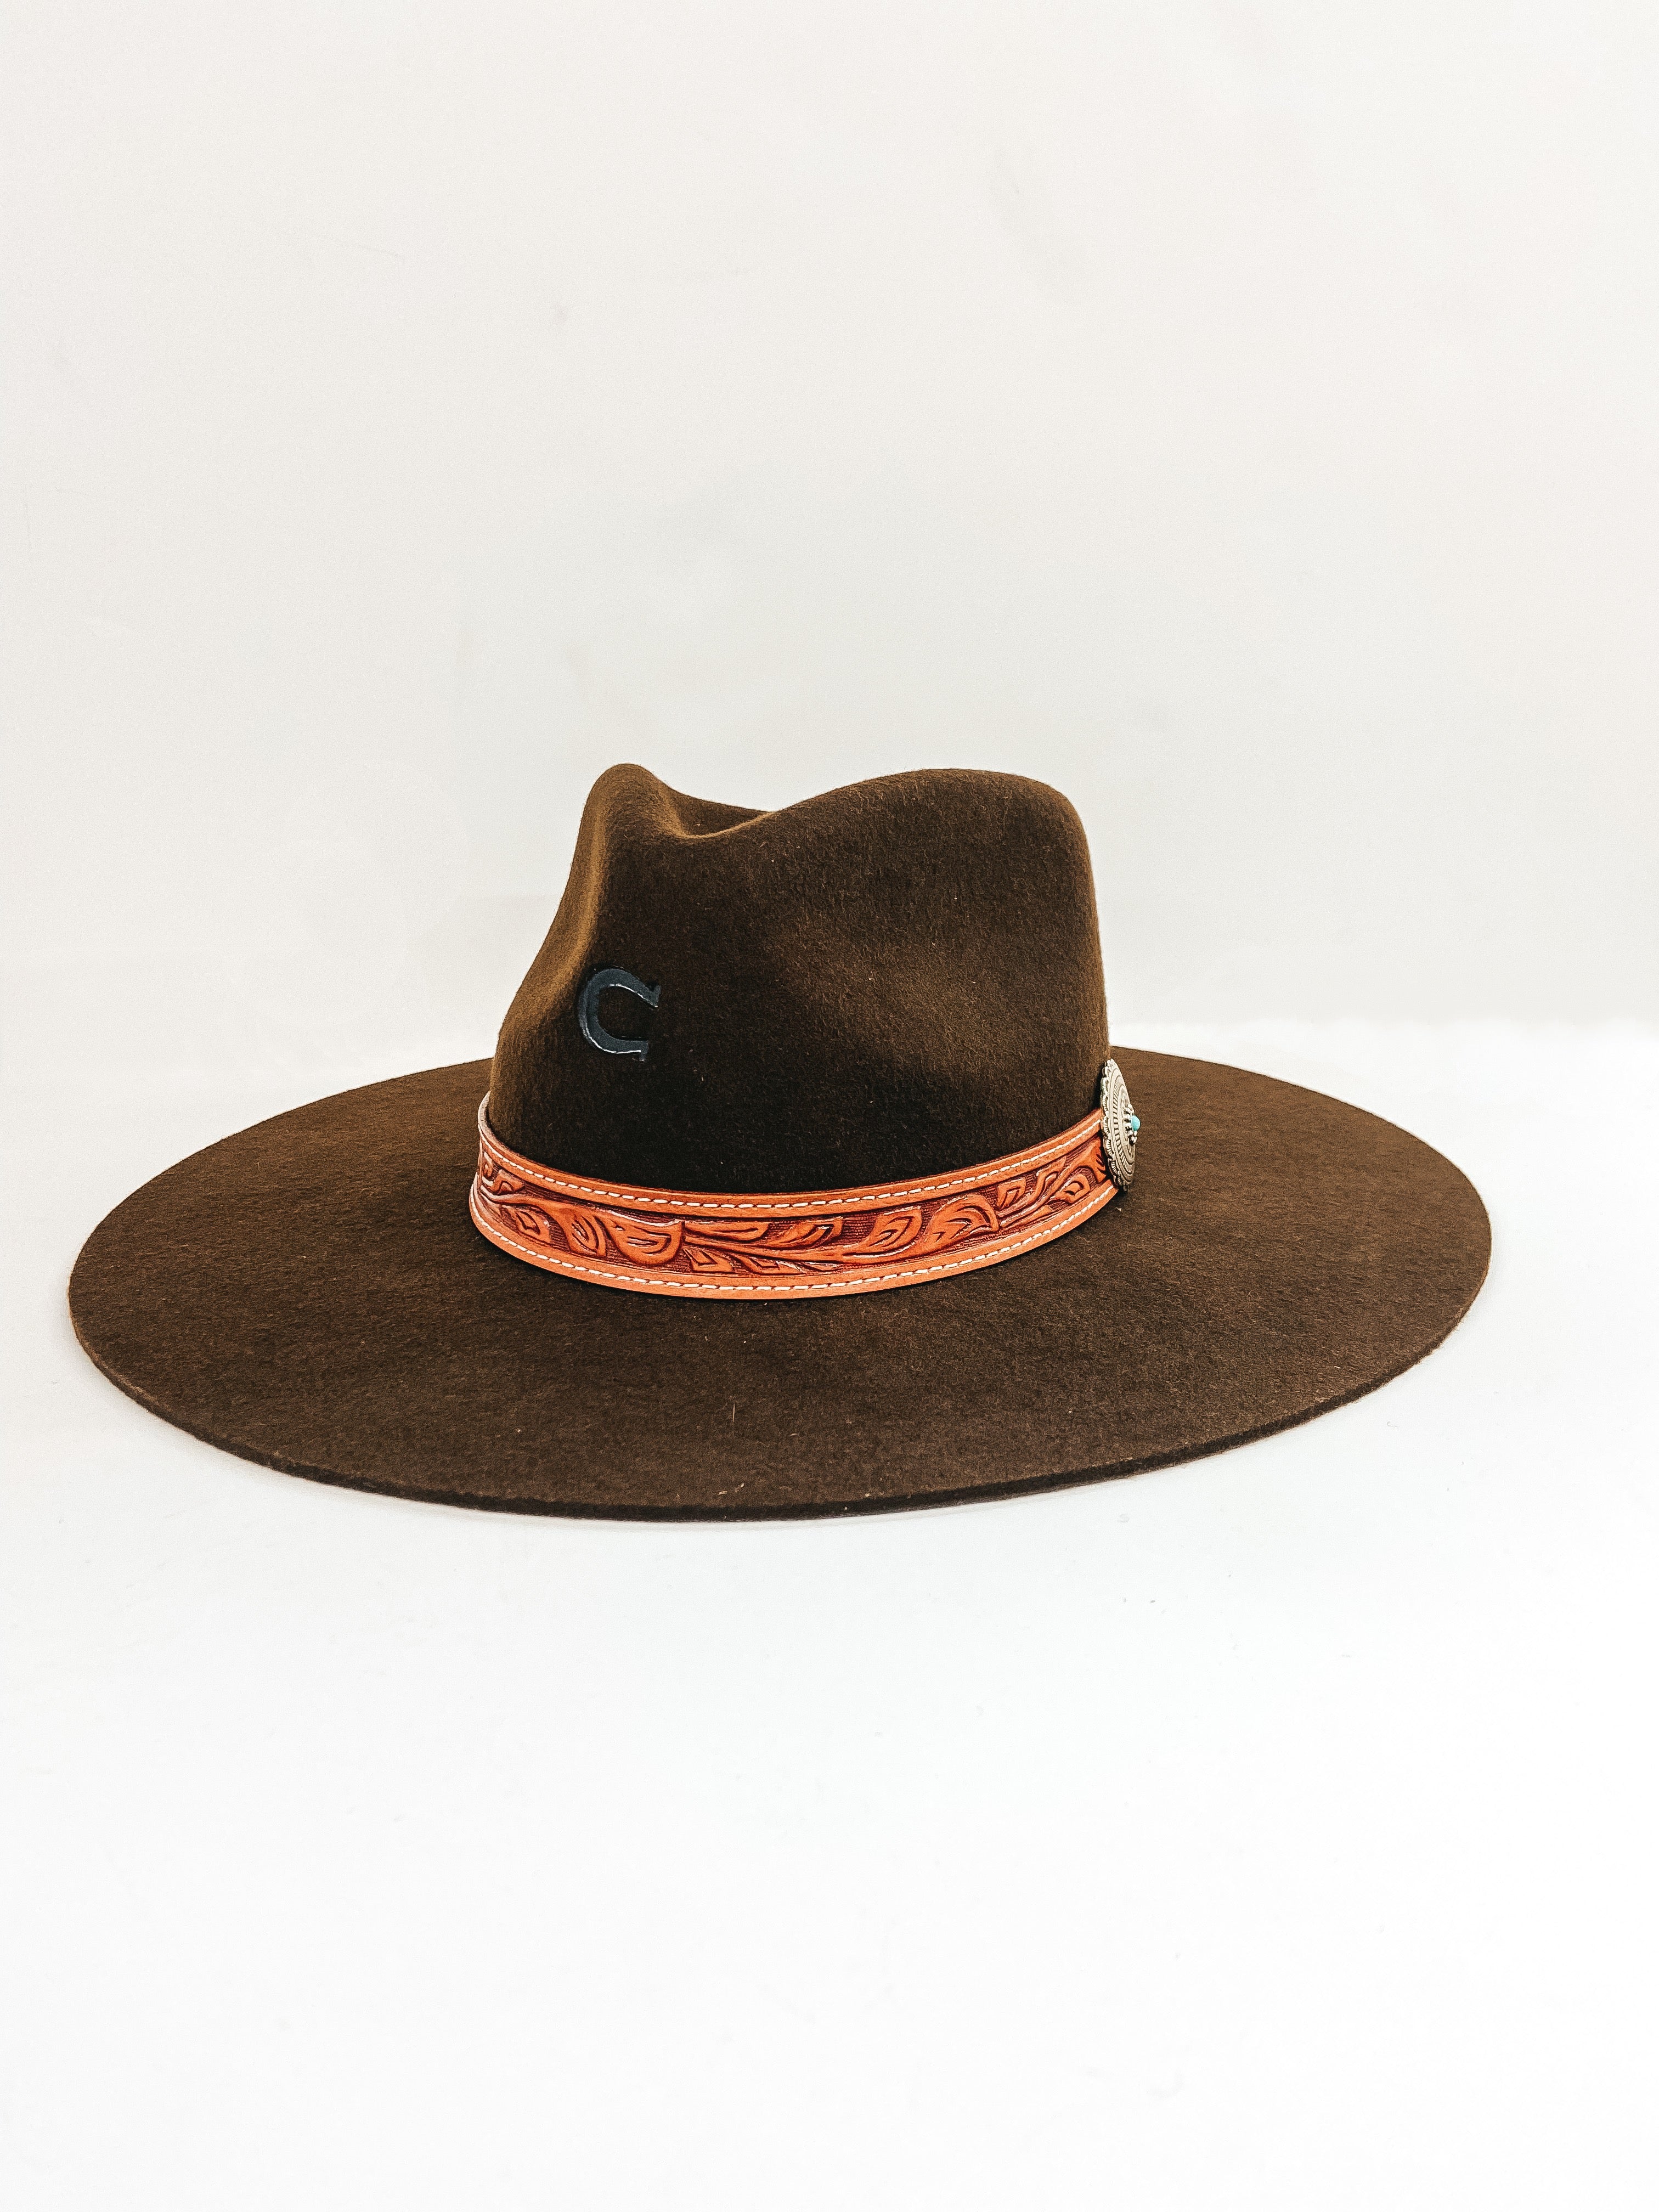 Charlie 1 Horse | White Sands Wool Felt Hat with Leather Tooled Band and Silver Concho in Chocolate Brown